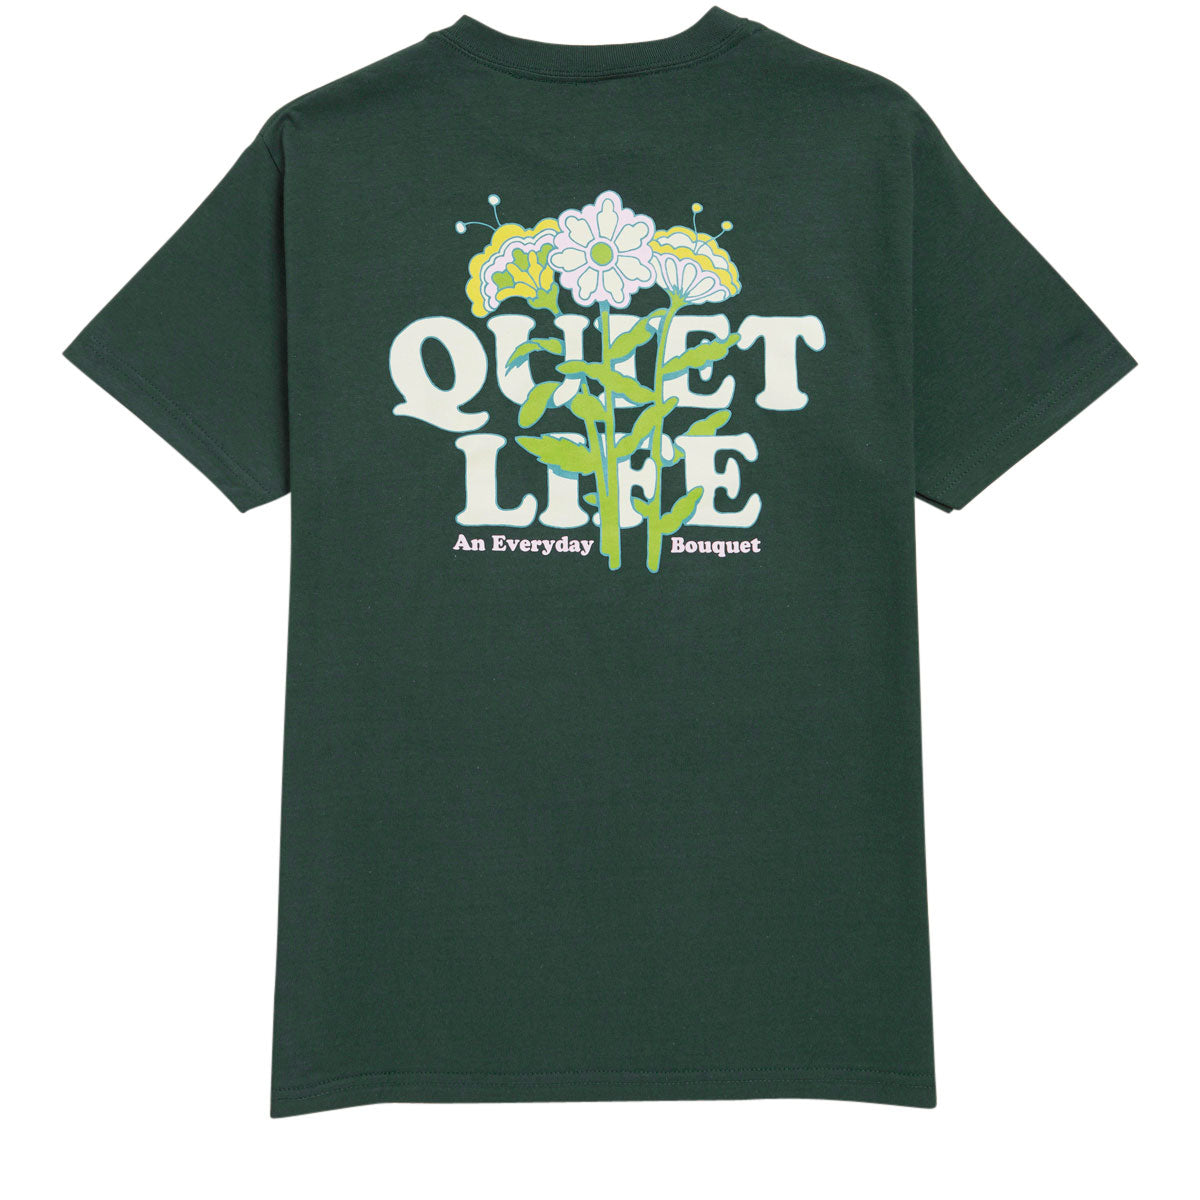 The Quiet Life Everyday Bouquet T-Shirt - Hunter Green image 1